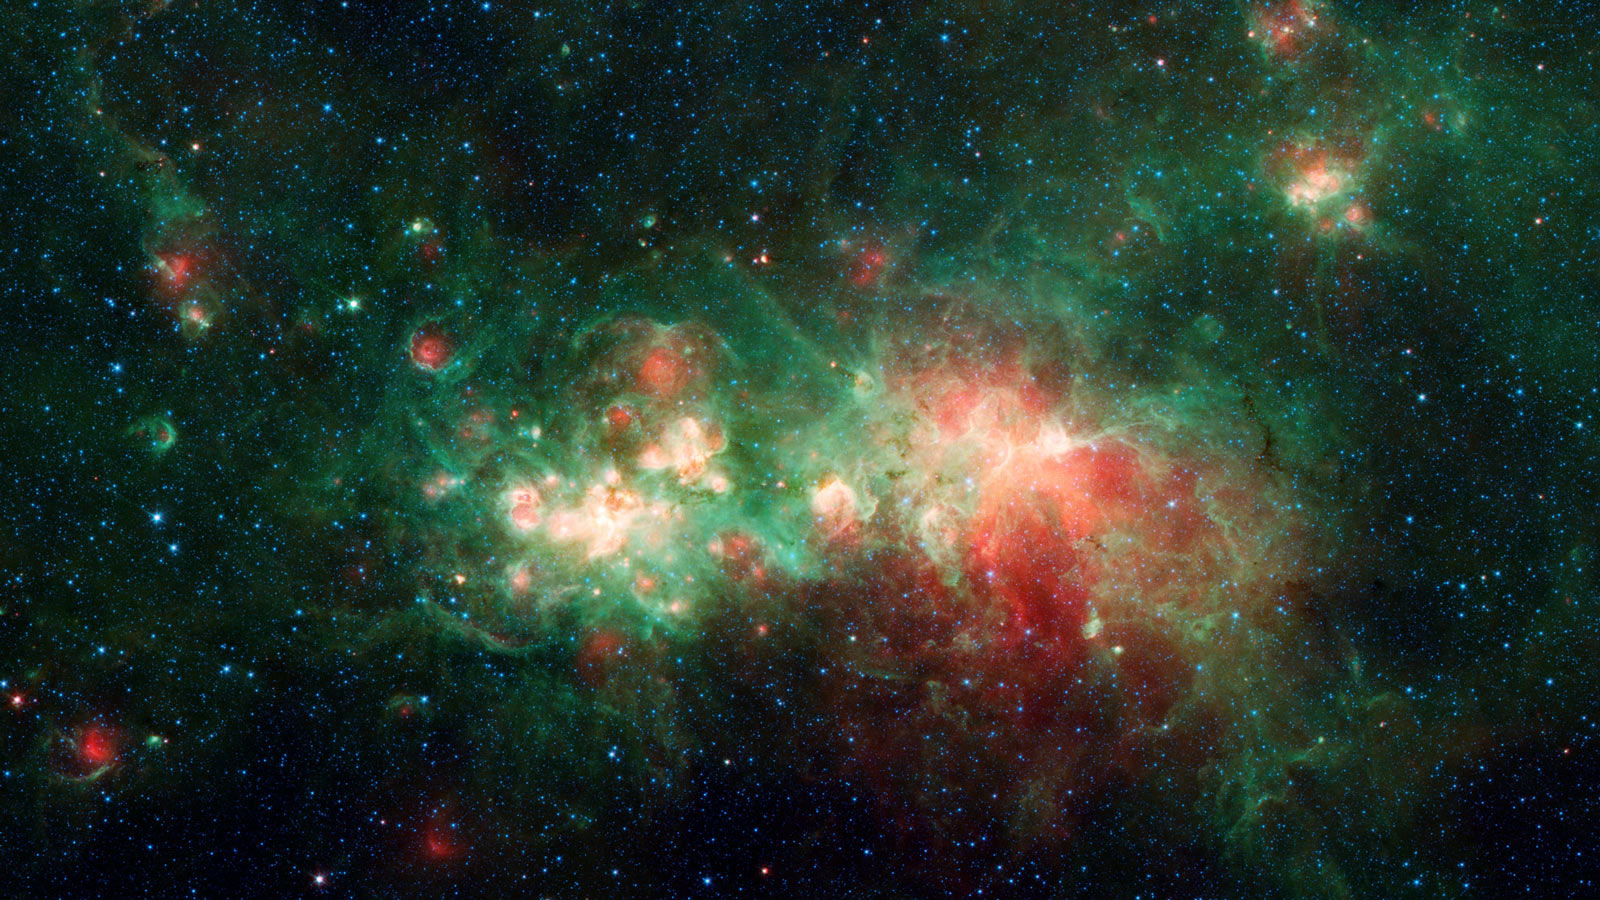 A vibrant space image showing a star-forming region with clusters of bright stars and colorful nebulas in shades of red and green.